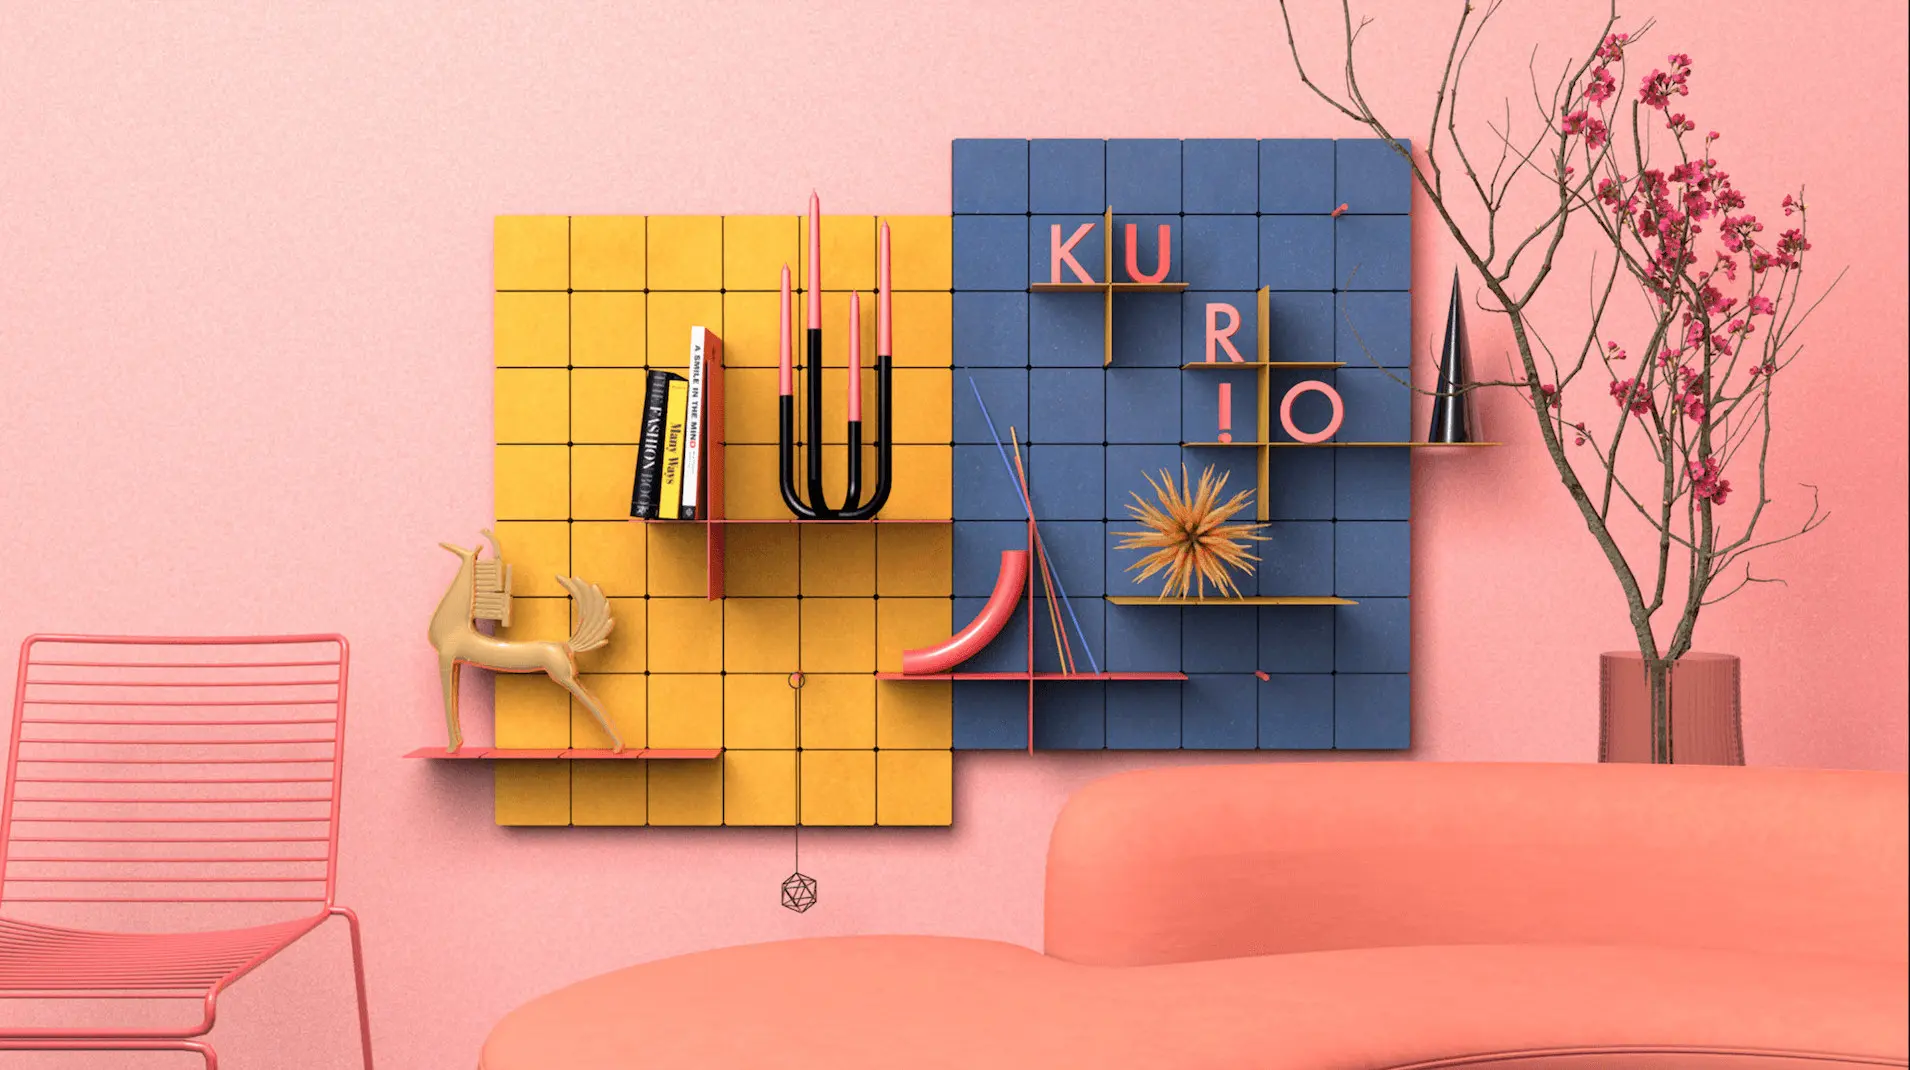 Kur!o shelving system by Von Morgen